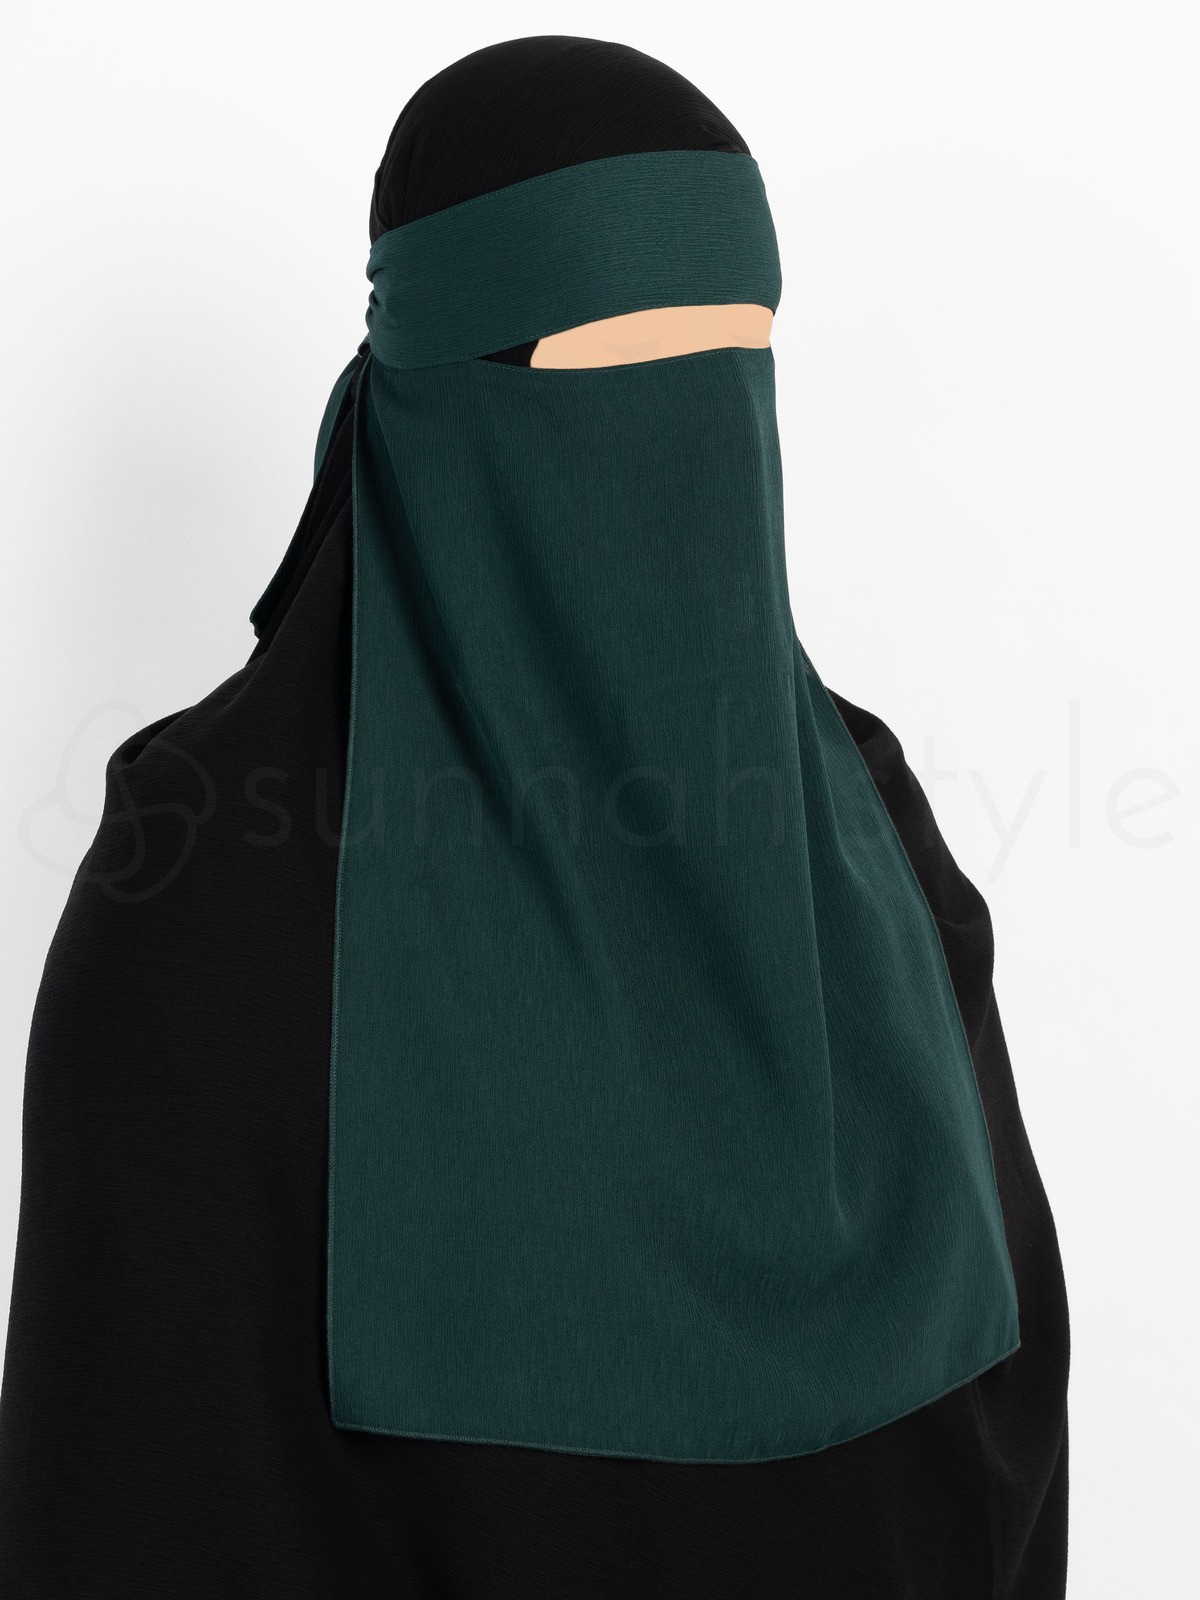 Sunnah Style - Brushed One Layer Niqab (Pine)